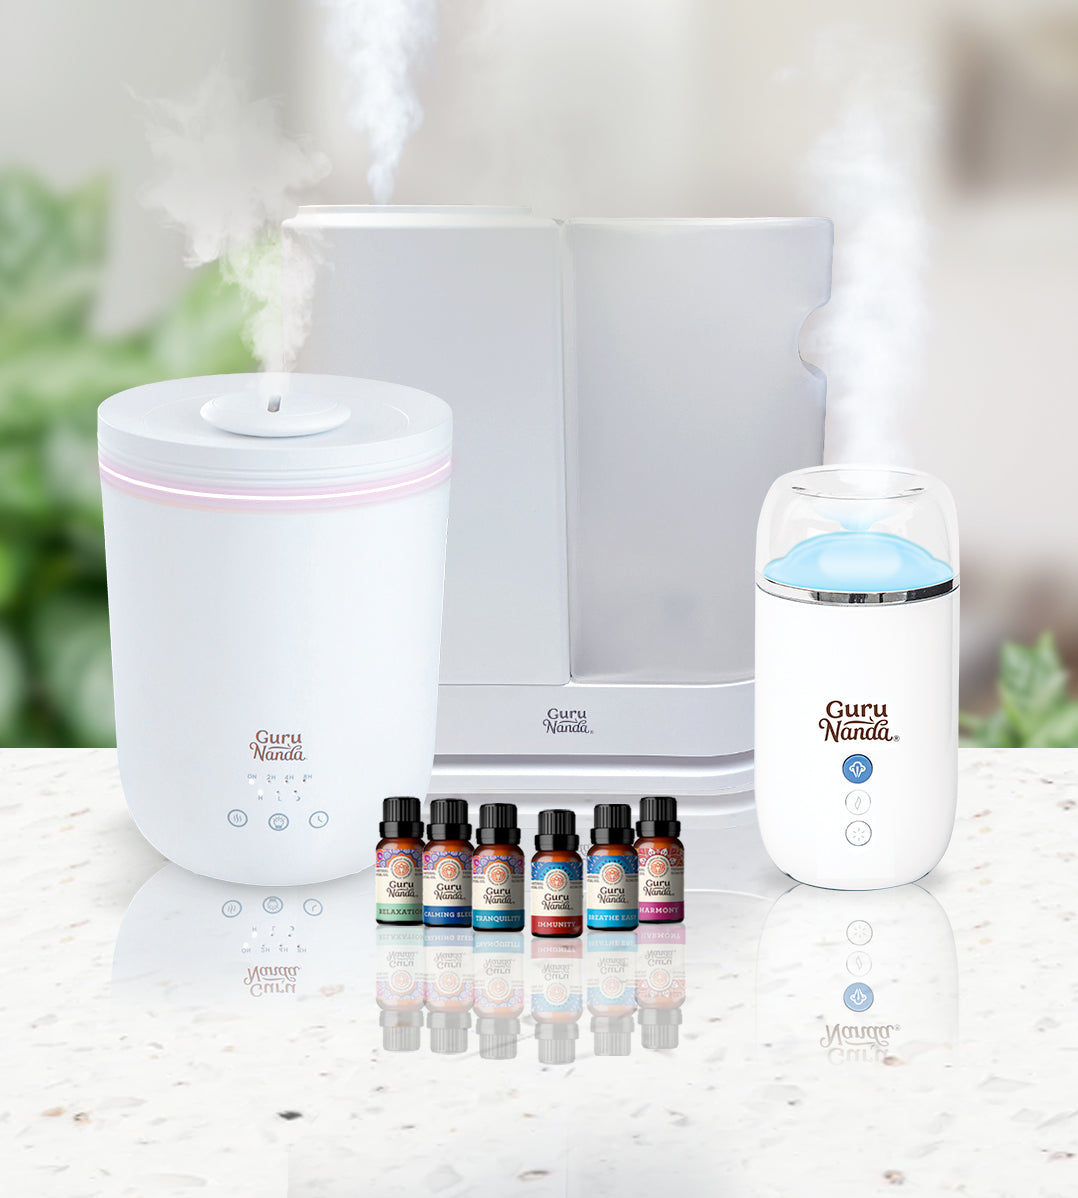 Breathe Air Essential Oil Blend by Revive Essential Oils - 100% Pure  Therapeutic Grade, for Diffuser, Humidifier, Massage, Aromatherapy, Skin &  Hair